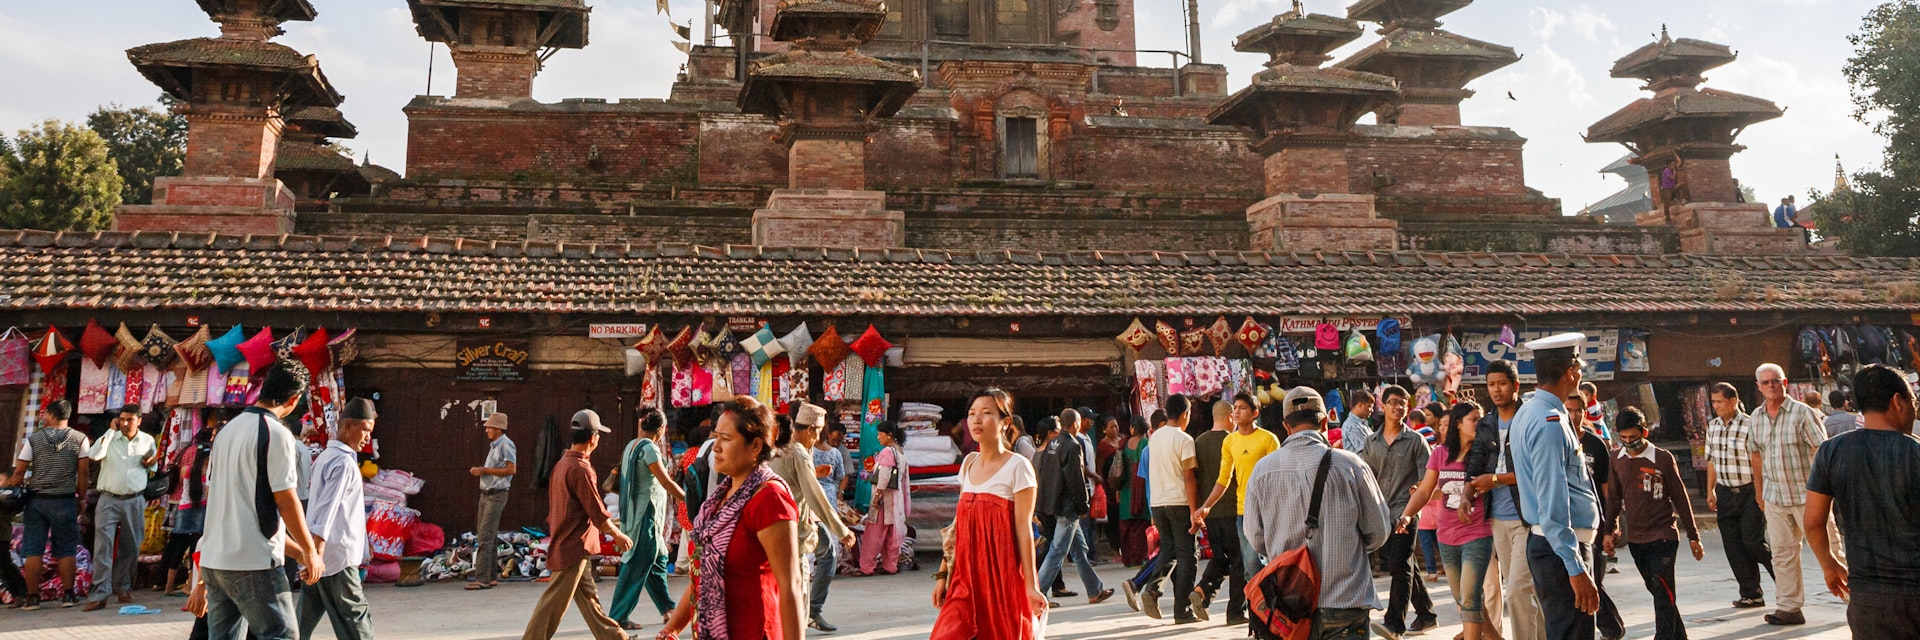 Market and crowds of people at the walls of ancient Taleju Temple on Durbar Square in Kathmandu.